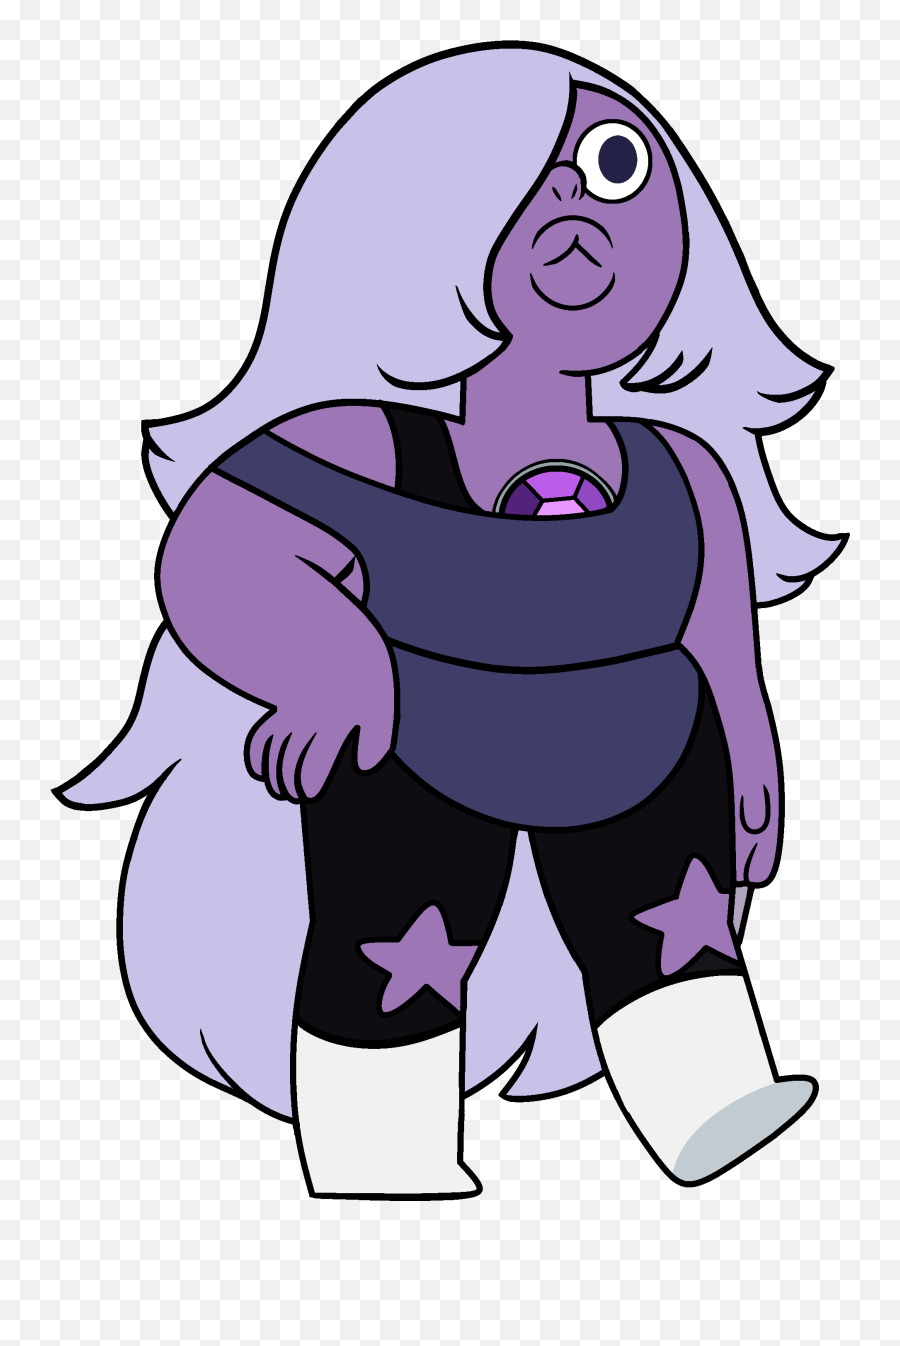 Steven Universe Amethyst Png Image With - Purple Steven Universe Character,Steven Universe Amethyst Png